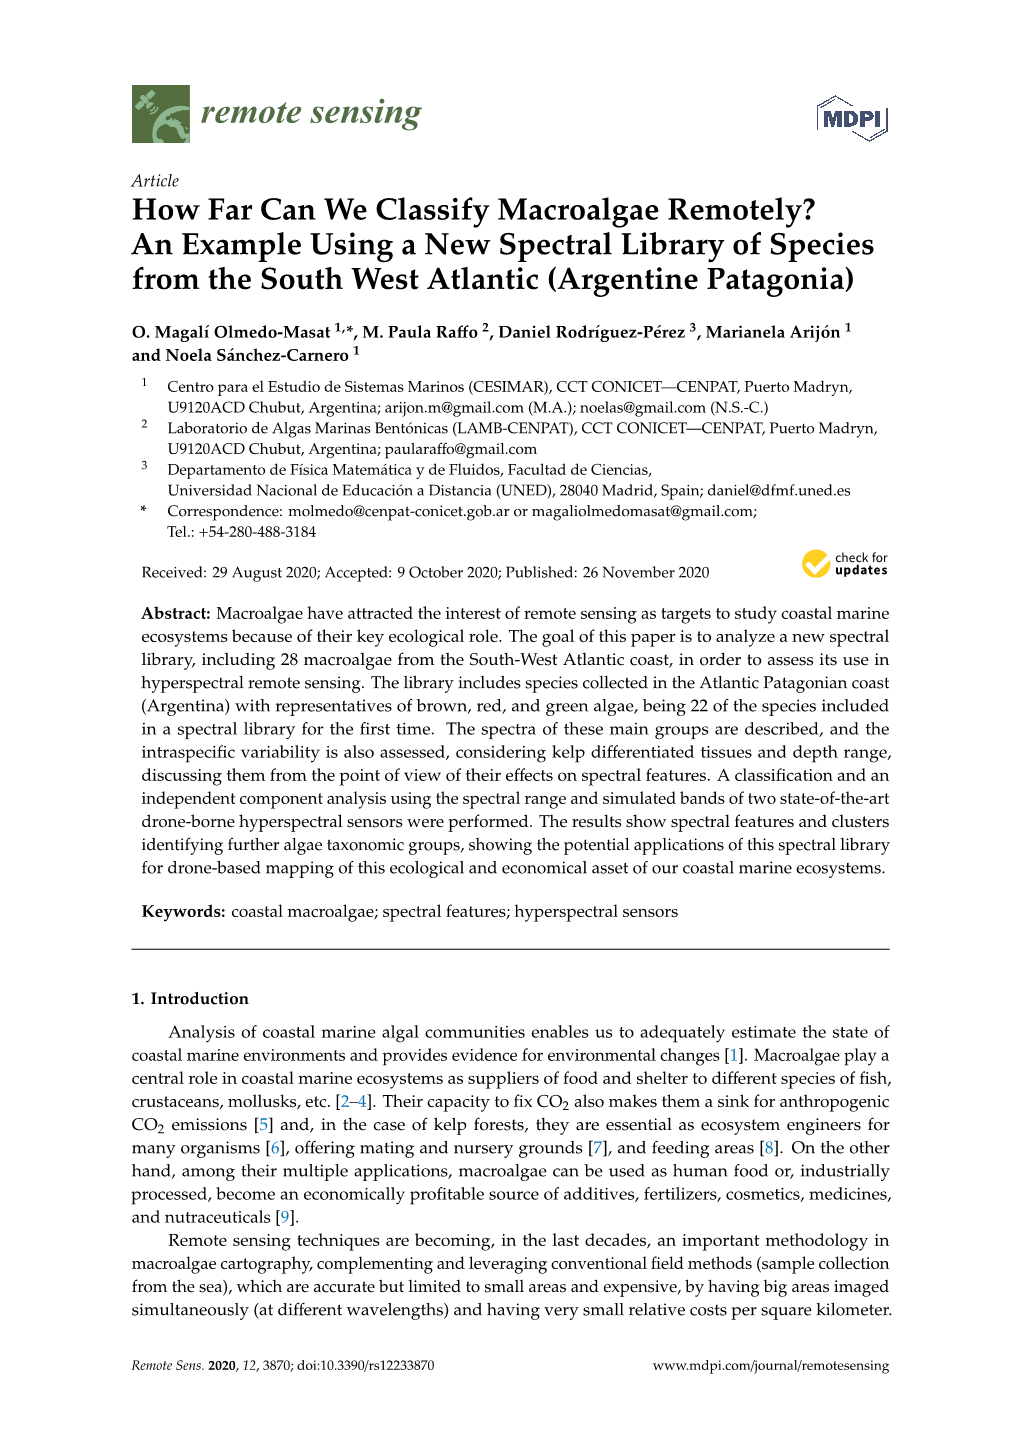 How Far Can We Classify Macroalgae Remotely? an Example Using a New Spectral Library of Species from the South West Atlantic (Argentine Patagonia)